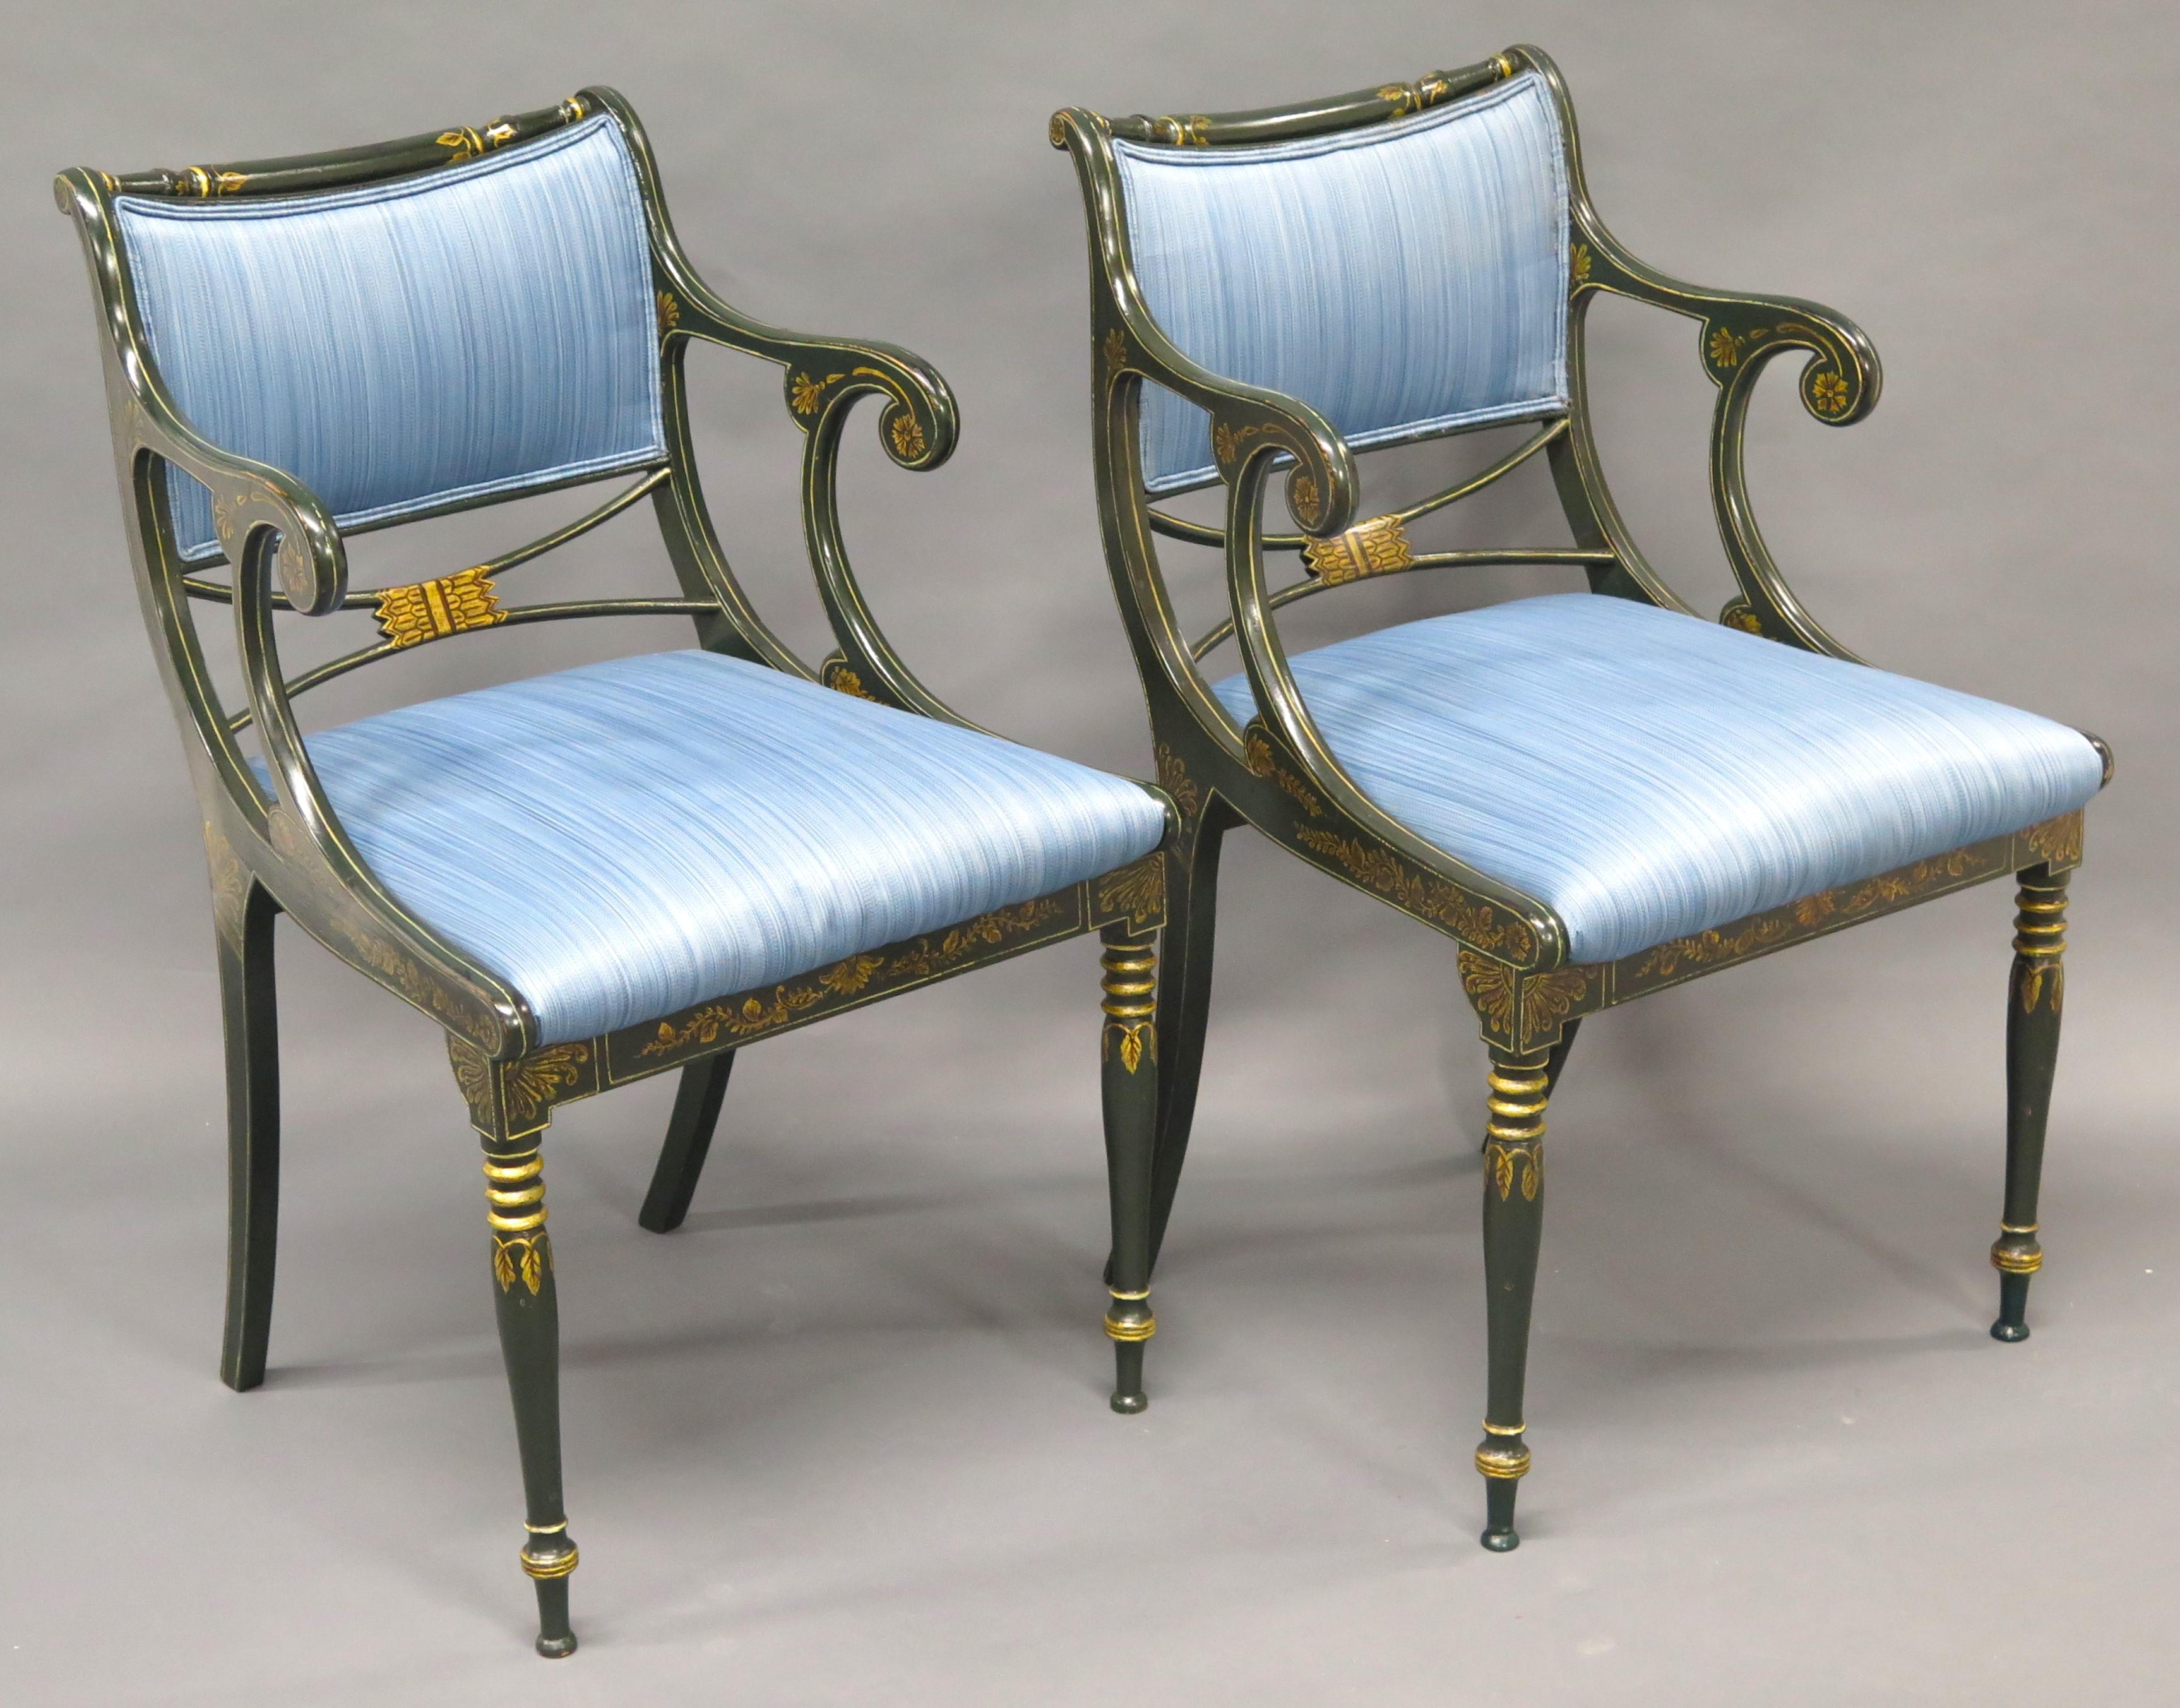 English Regency style armchairs upholstered in a blue strie silk velvet, each chair has gilt stencil decoration over dark green ( almost black ) paint. England. Mid-20th Century